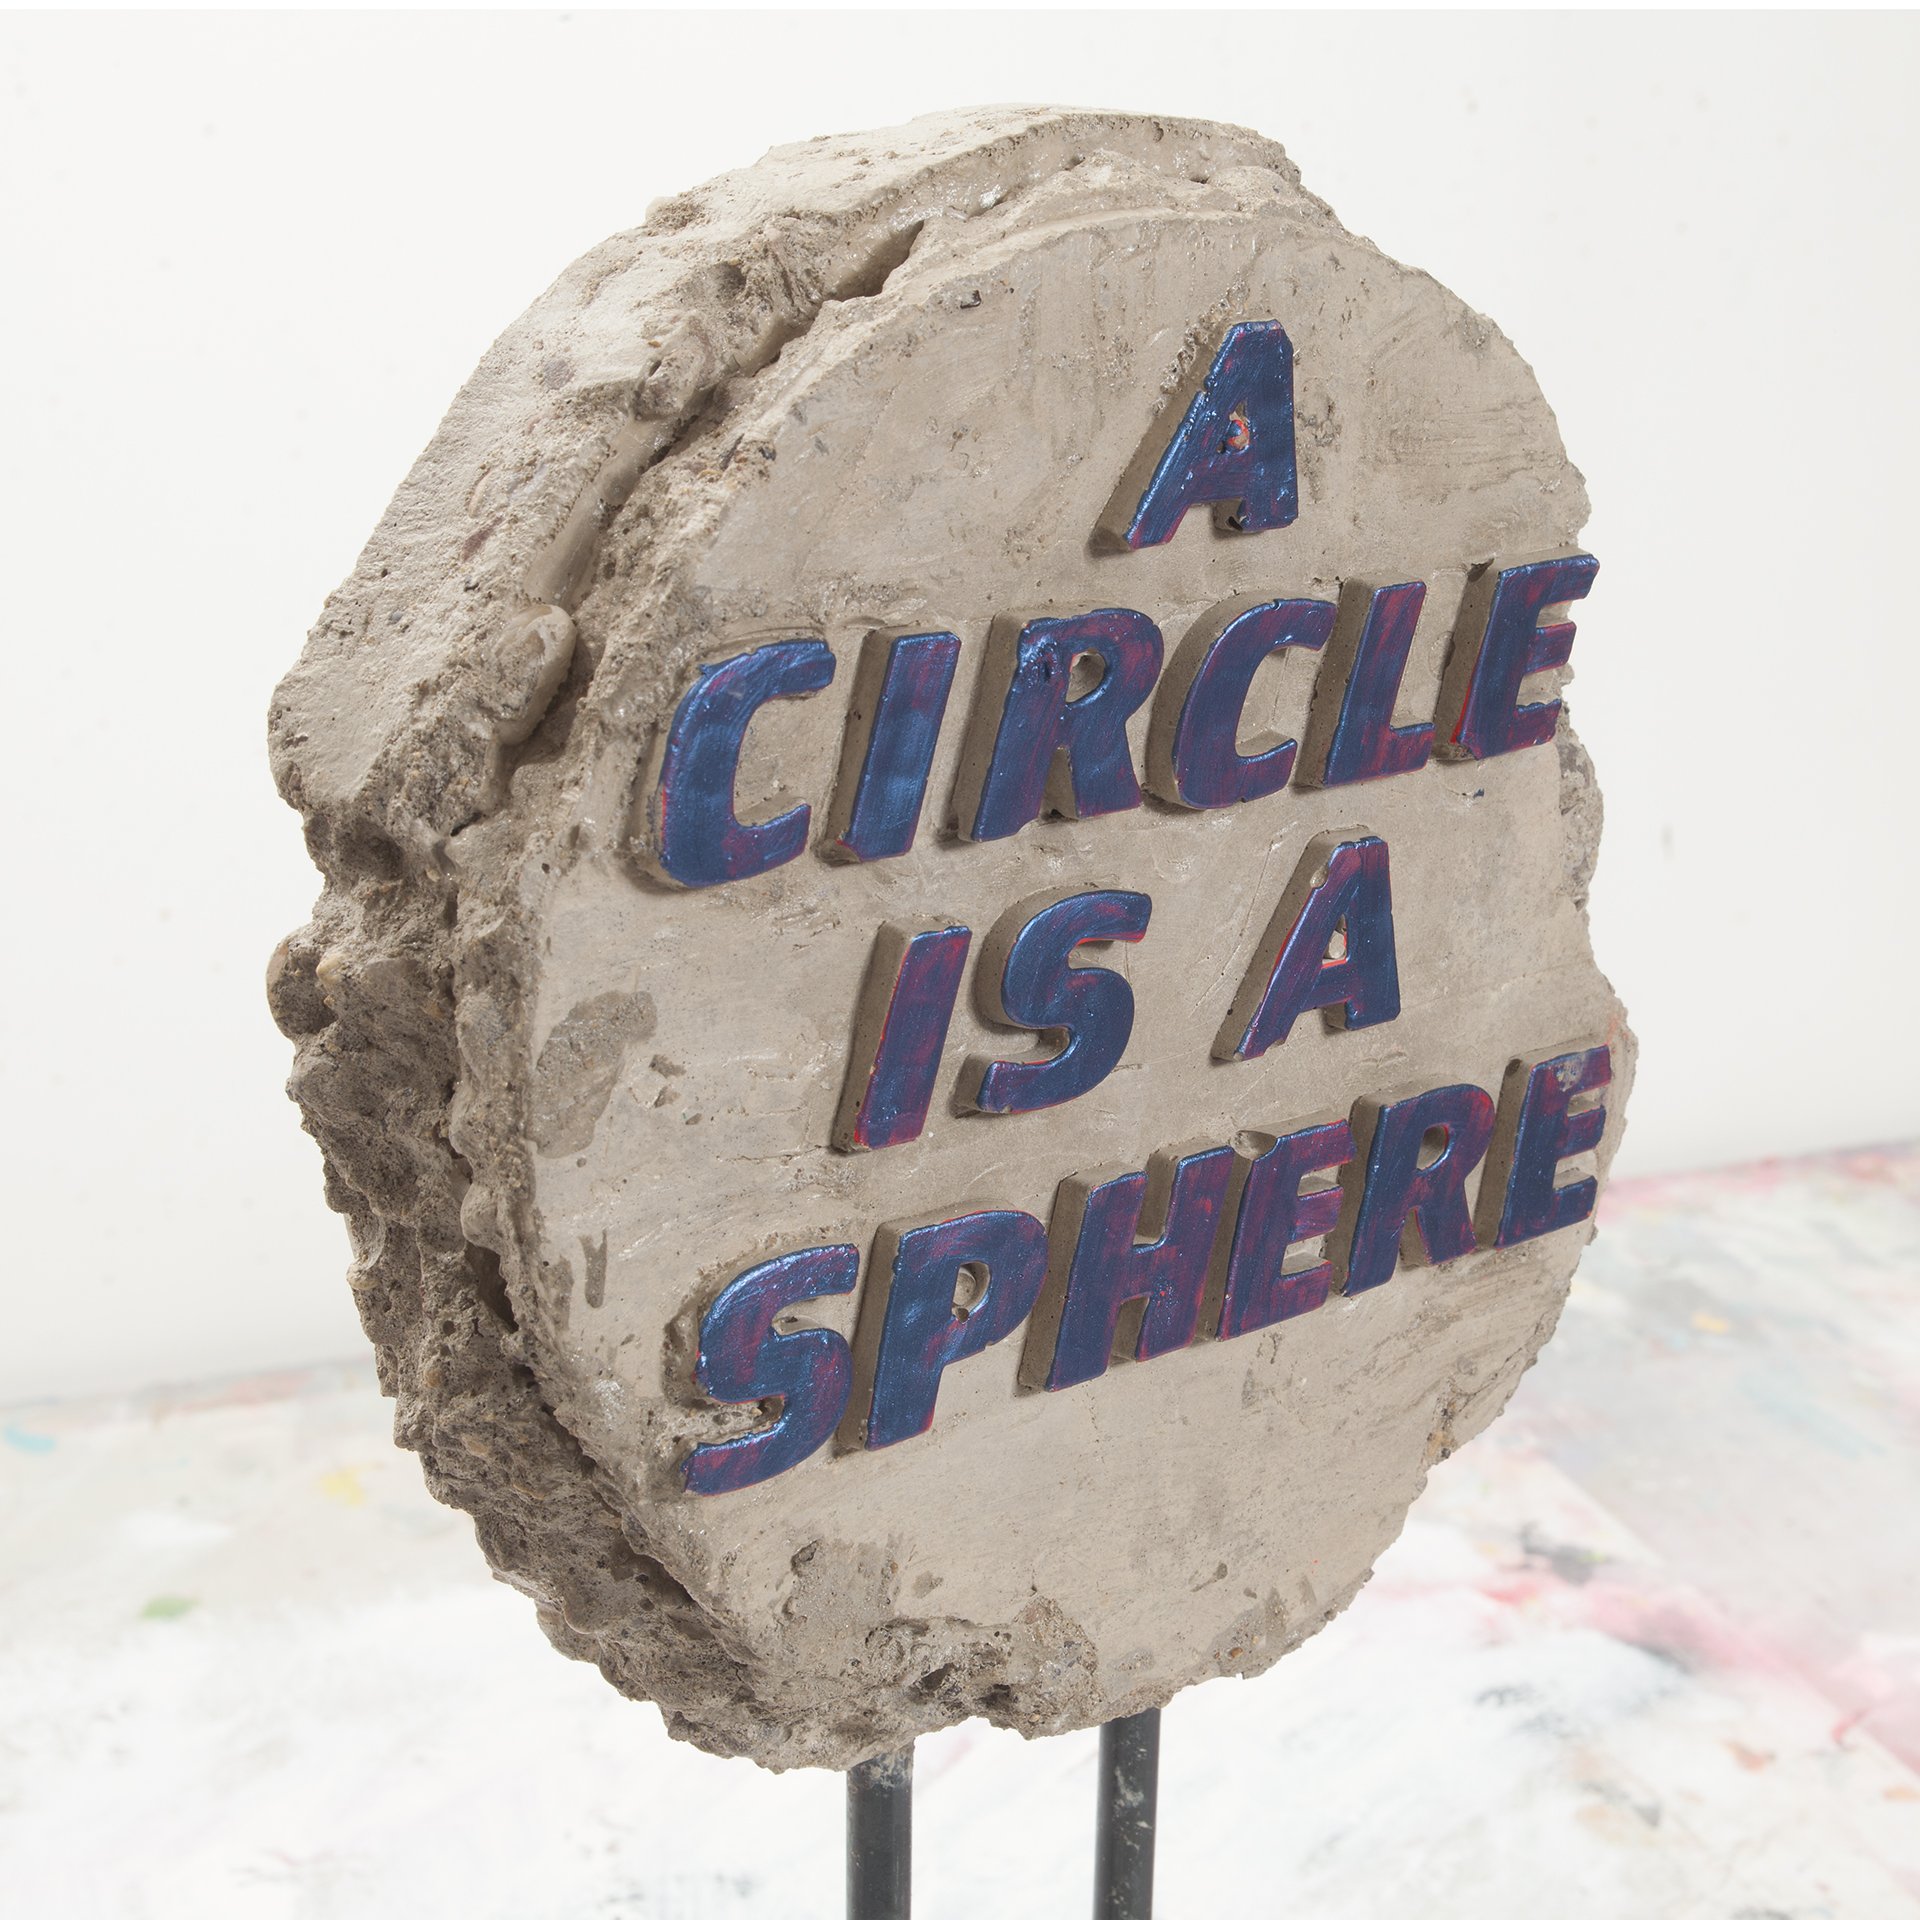 Fragment: A Circle is a Sphere